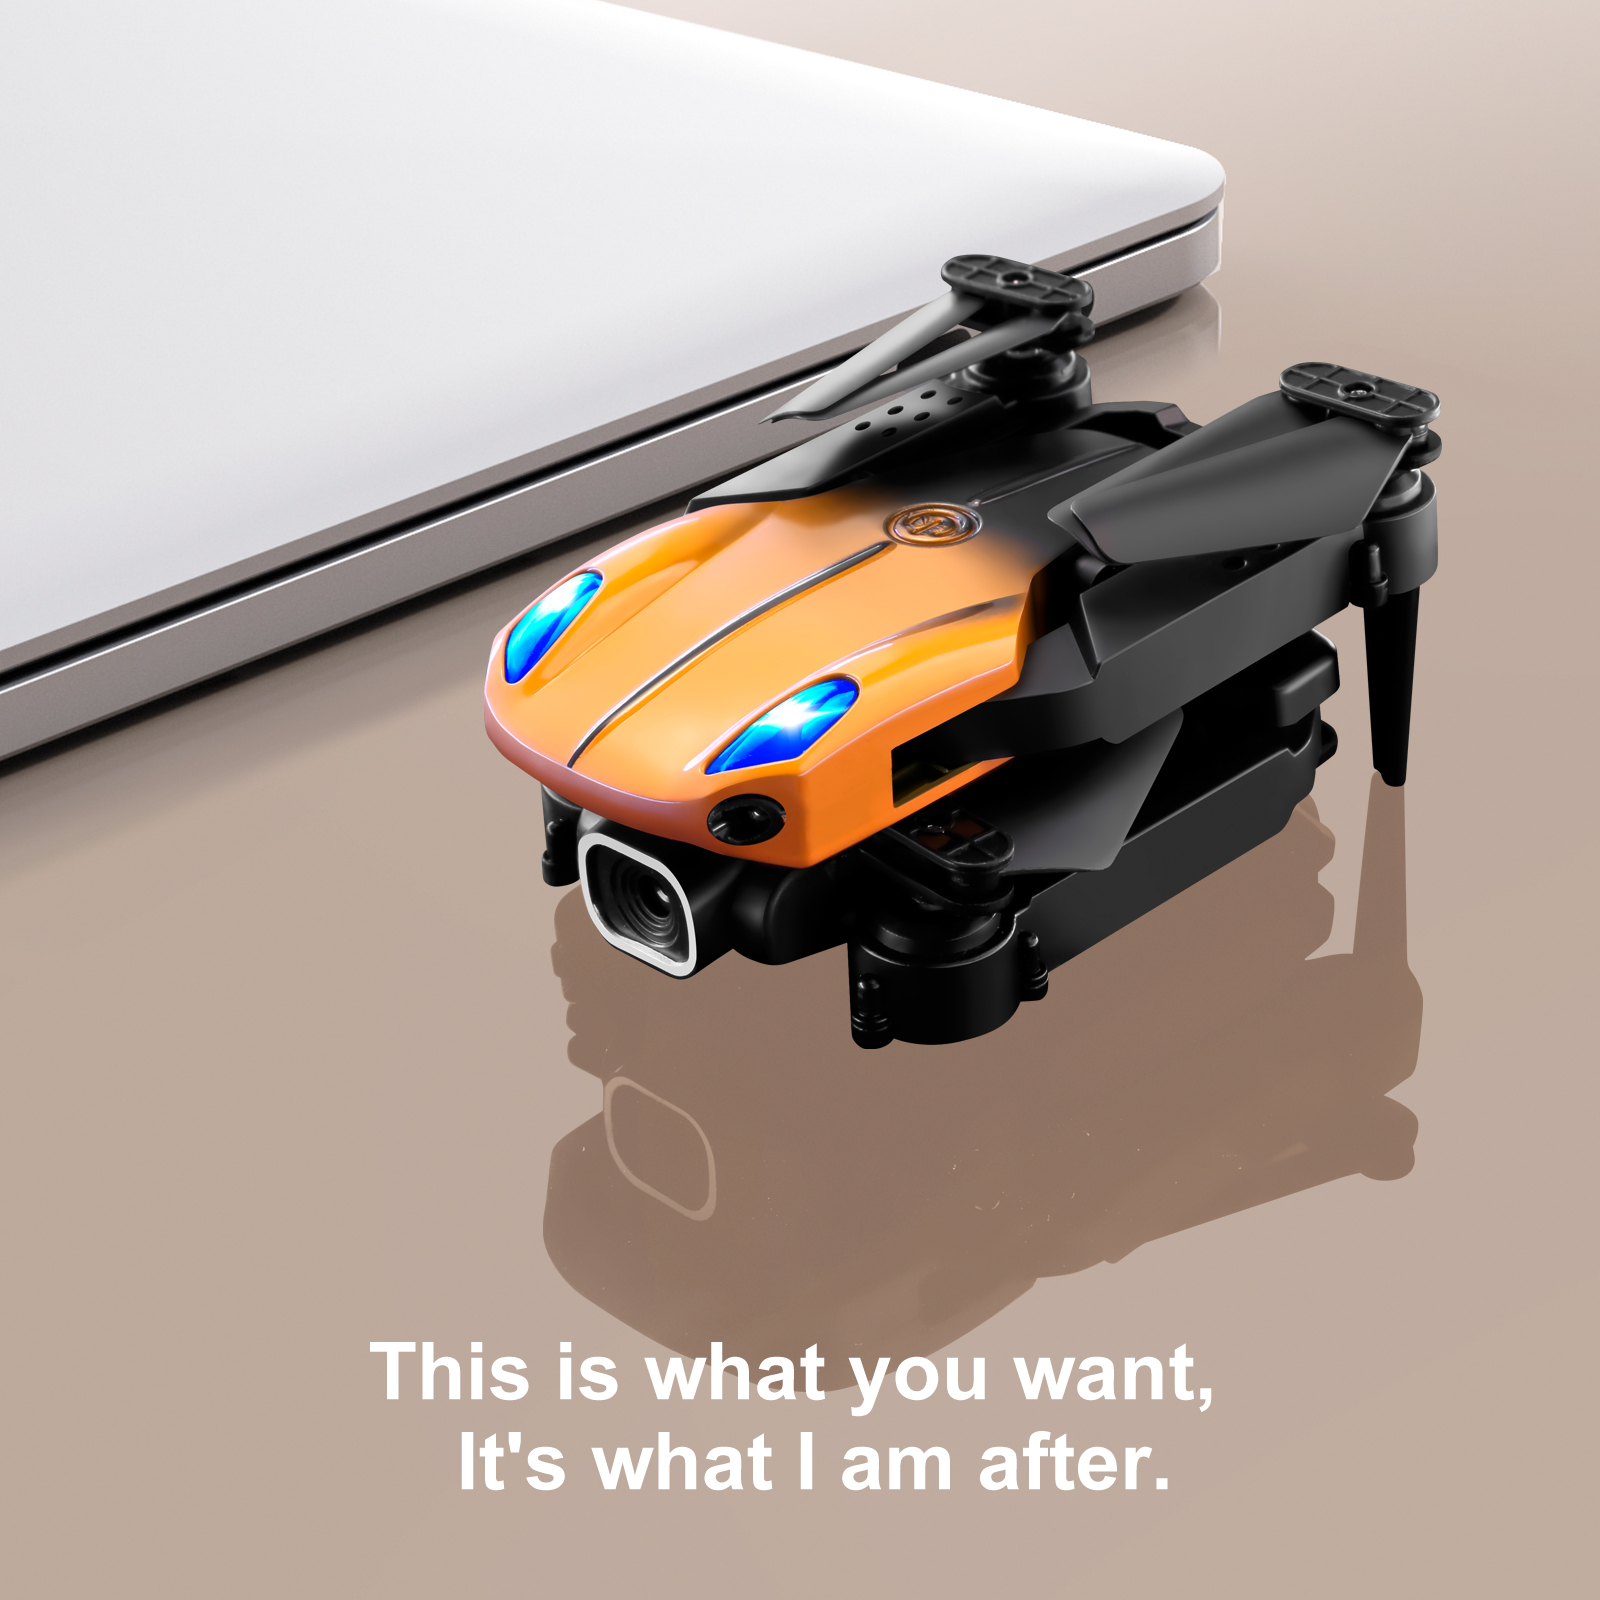 KY907-PRO-Mini-Wifi-FPV-with-4K-HD-Camera-Three-side-Obstacle-Avoidance-Headless-Mode-RC-Drone-Quadc-1906185-8